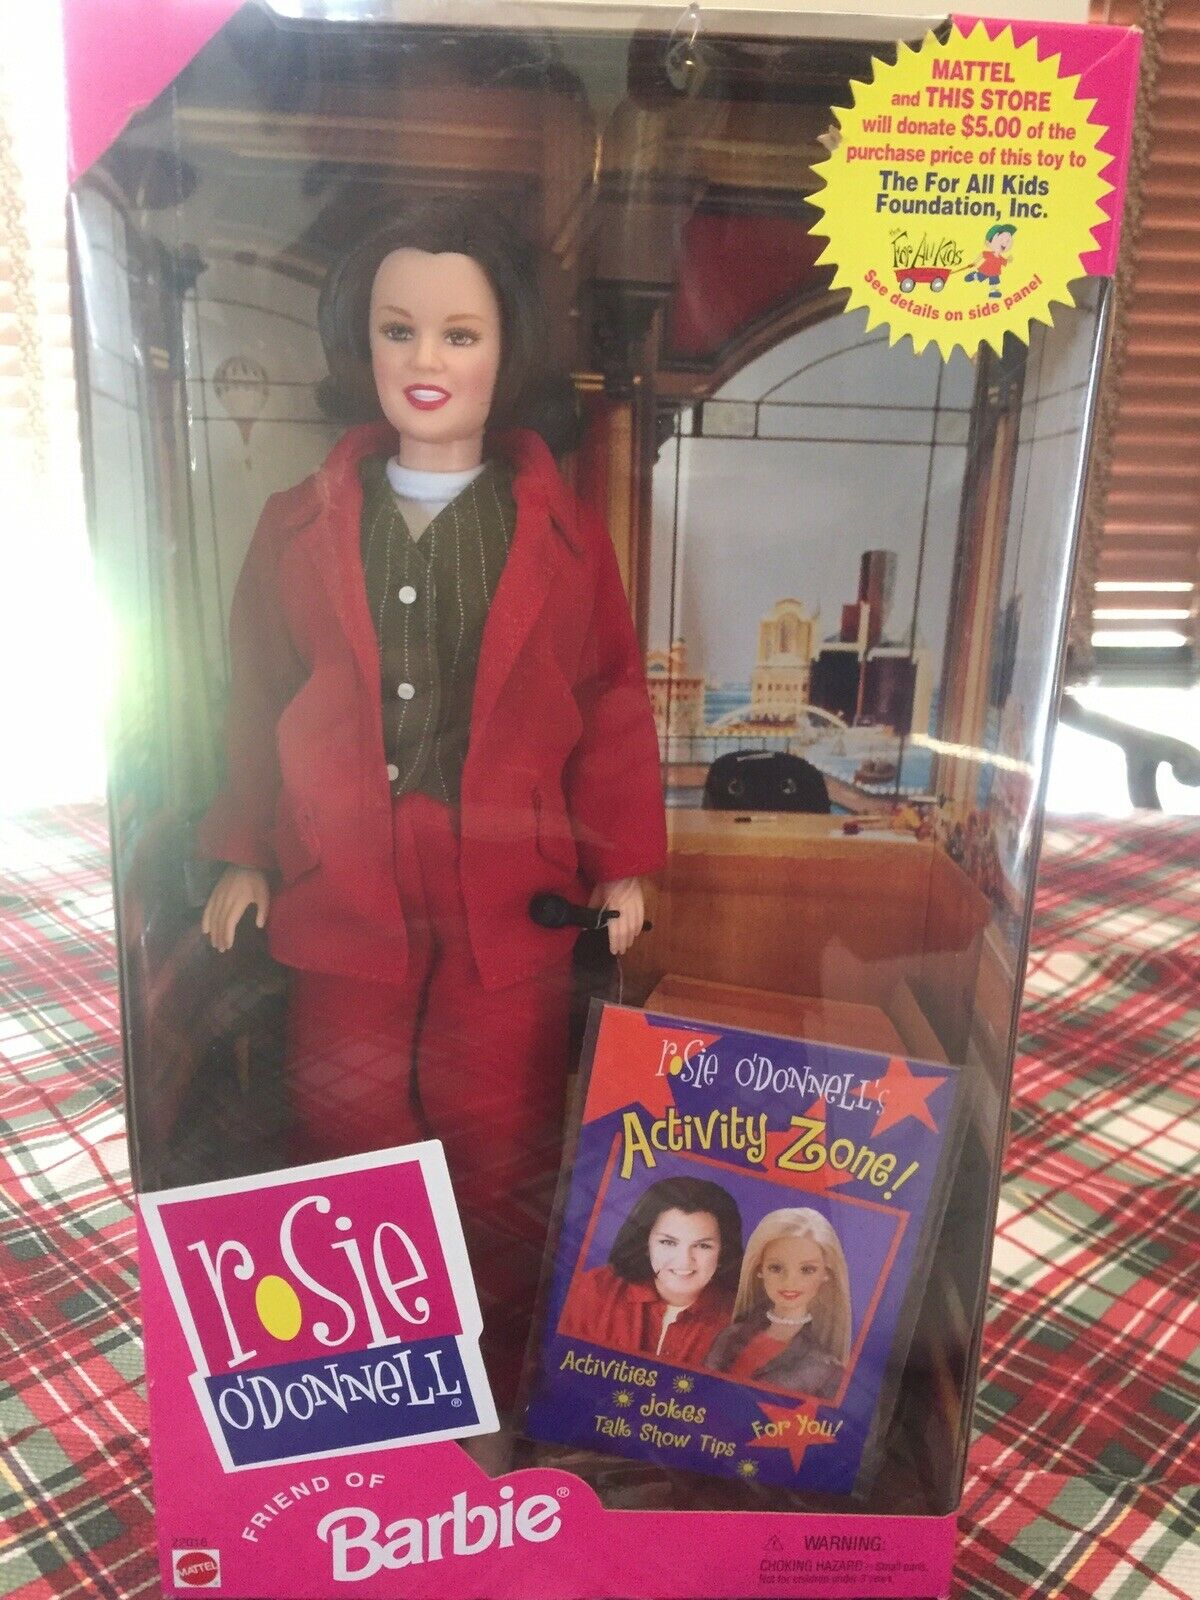 Rosie O'donnell Friend Of Barbie Doll 1999  Mint In Box